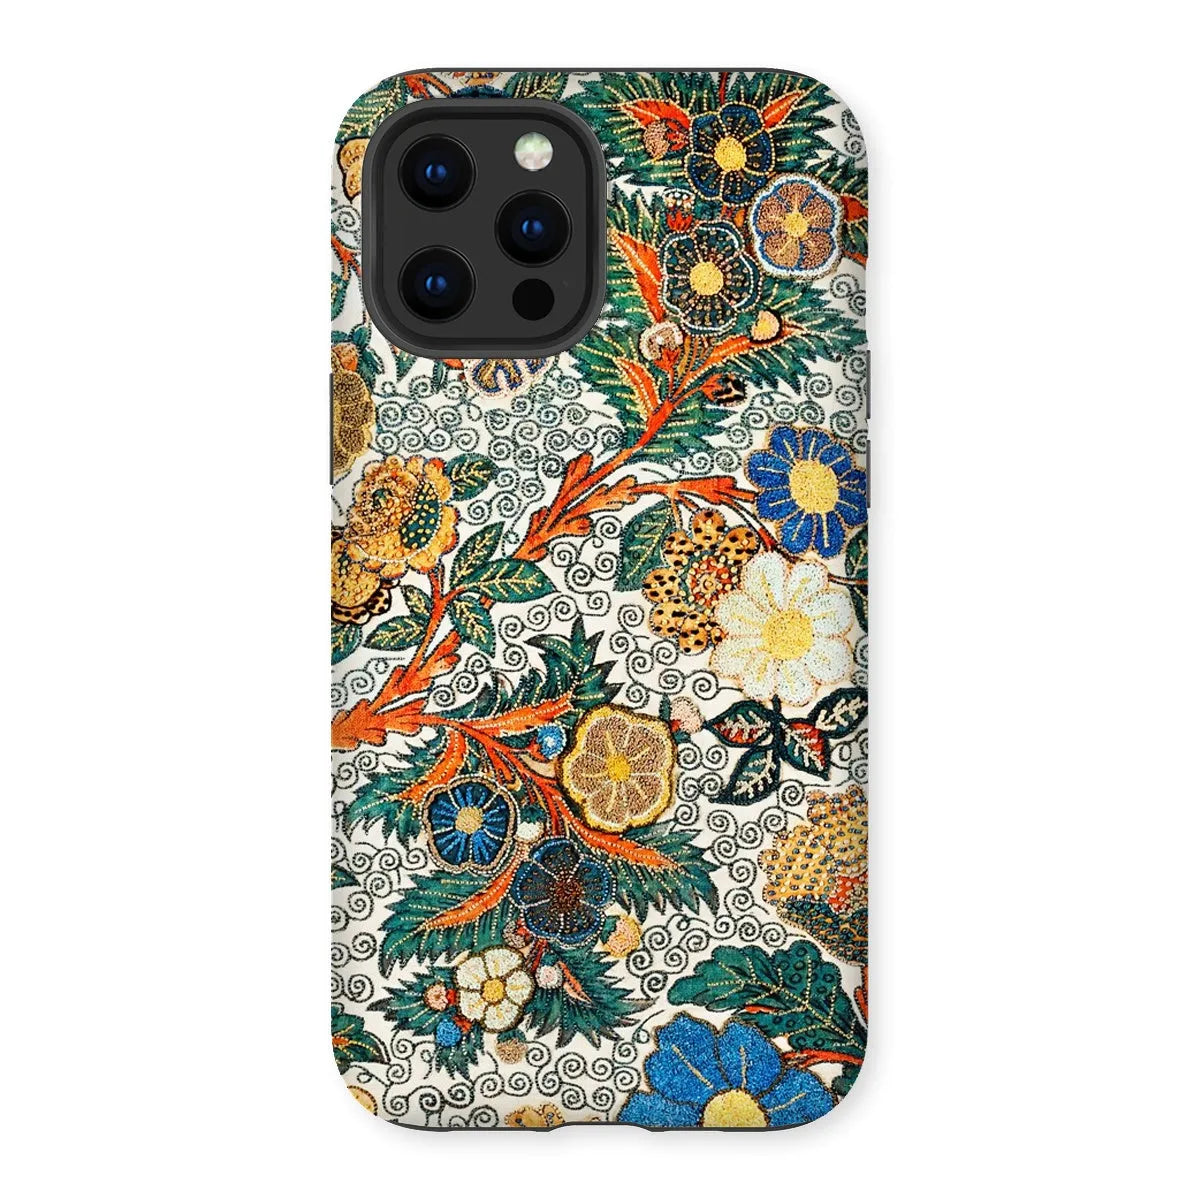 Blossomewhere Japanese Tapestry Art Phone Case - Iphone 12 Pro Max / Matte - Mobile Phone Cases - Aesthetic Art